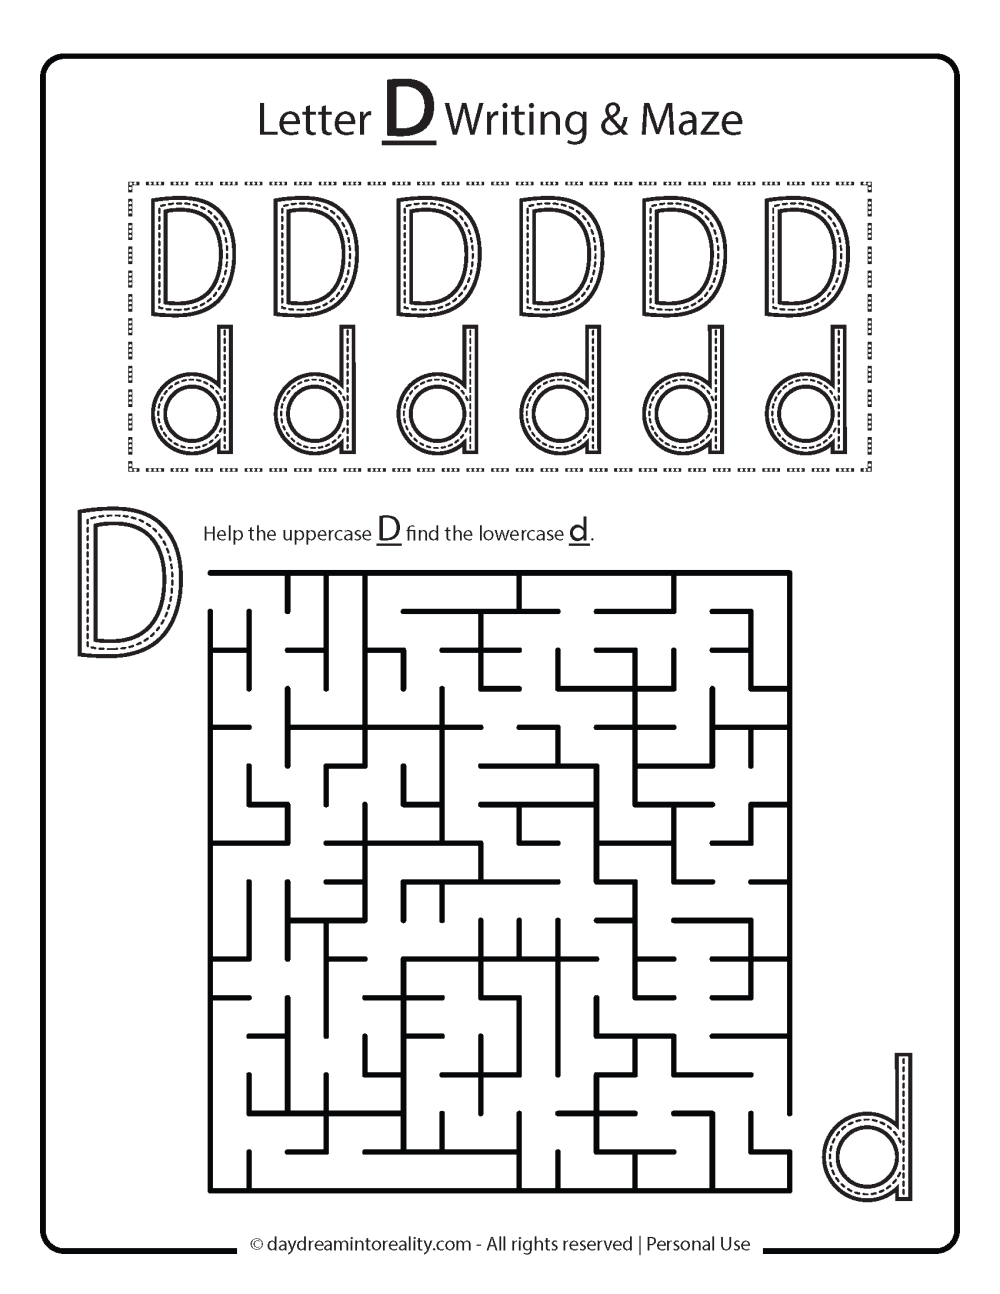 Letter D worksheet free printables. Writing practice with maze.